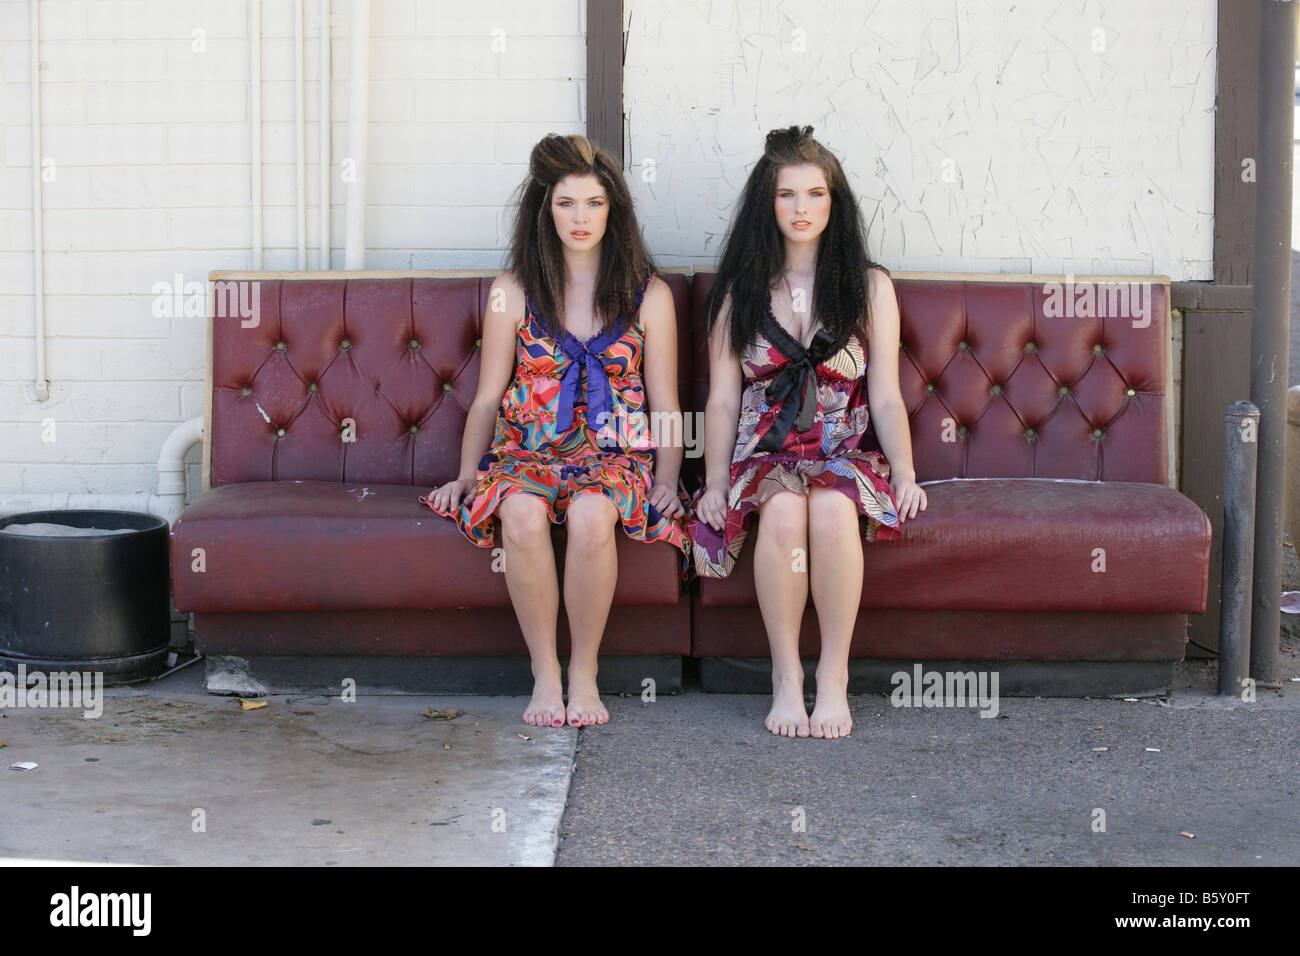 two sisters share a leather couch in patterned dresses Stock Photo